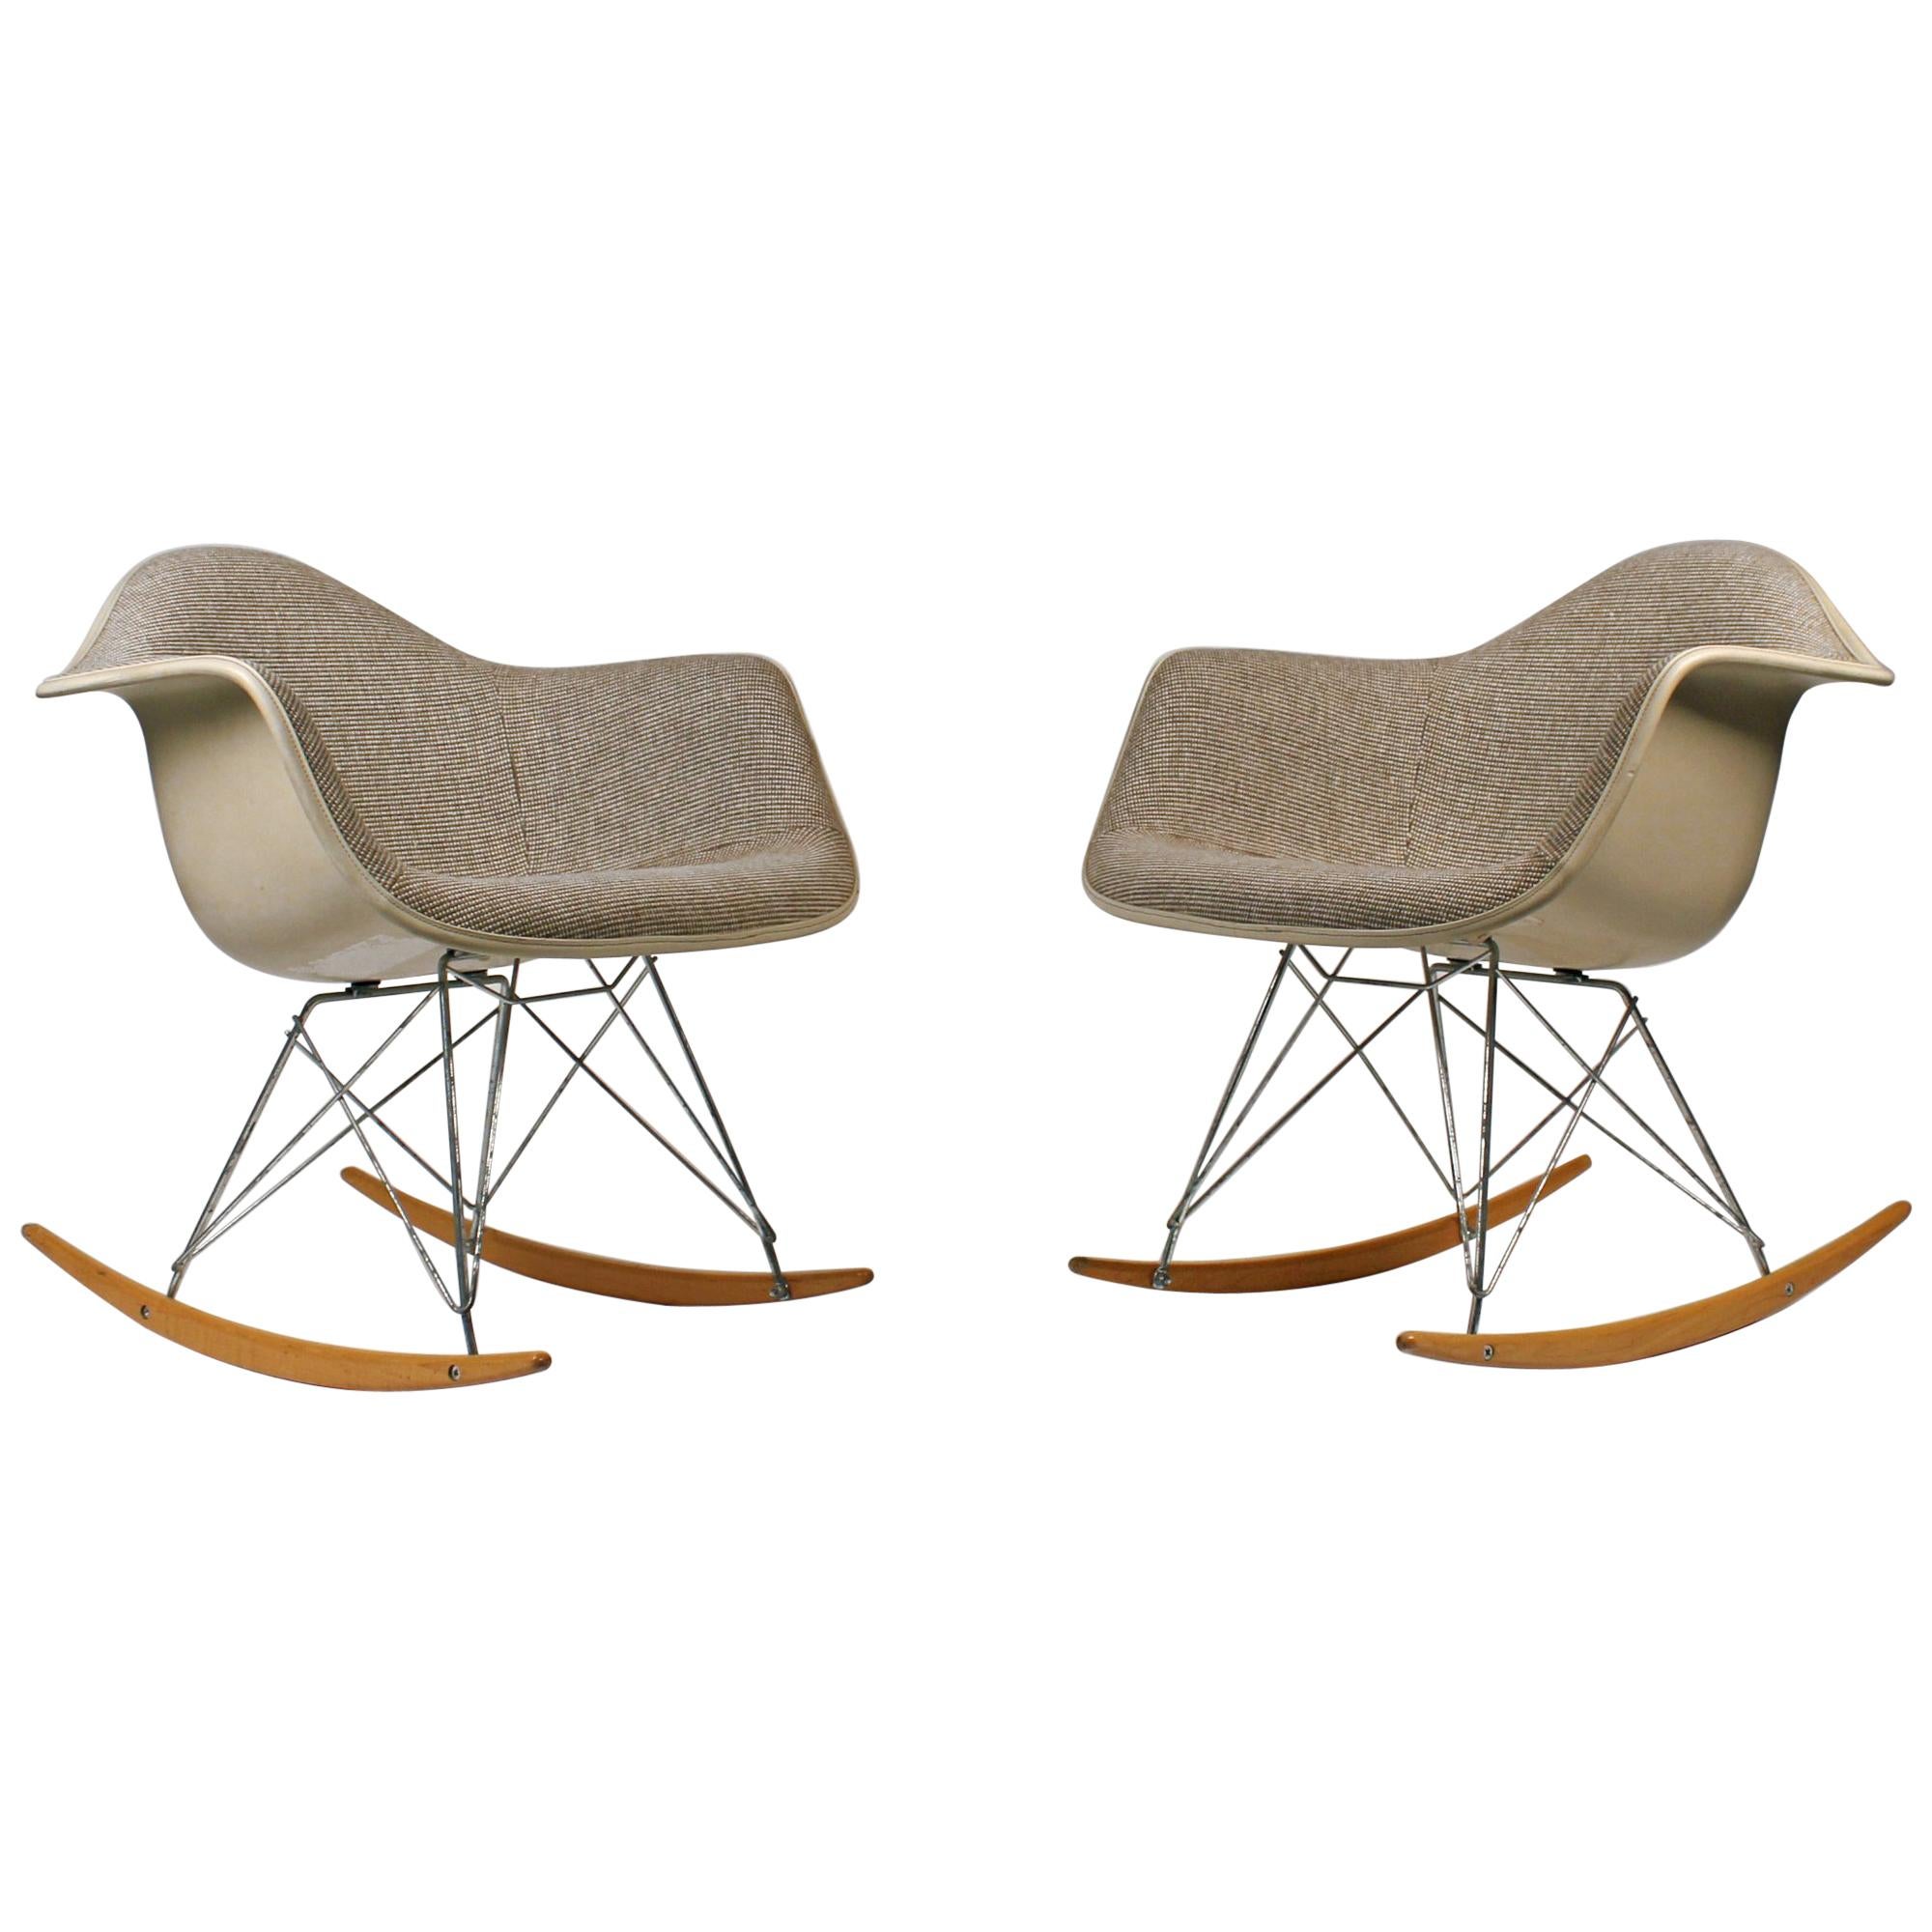 Rocking Chairs by Charles Eames for Herman Miller with Alexander Girard Textile For Sale